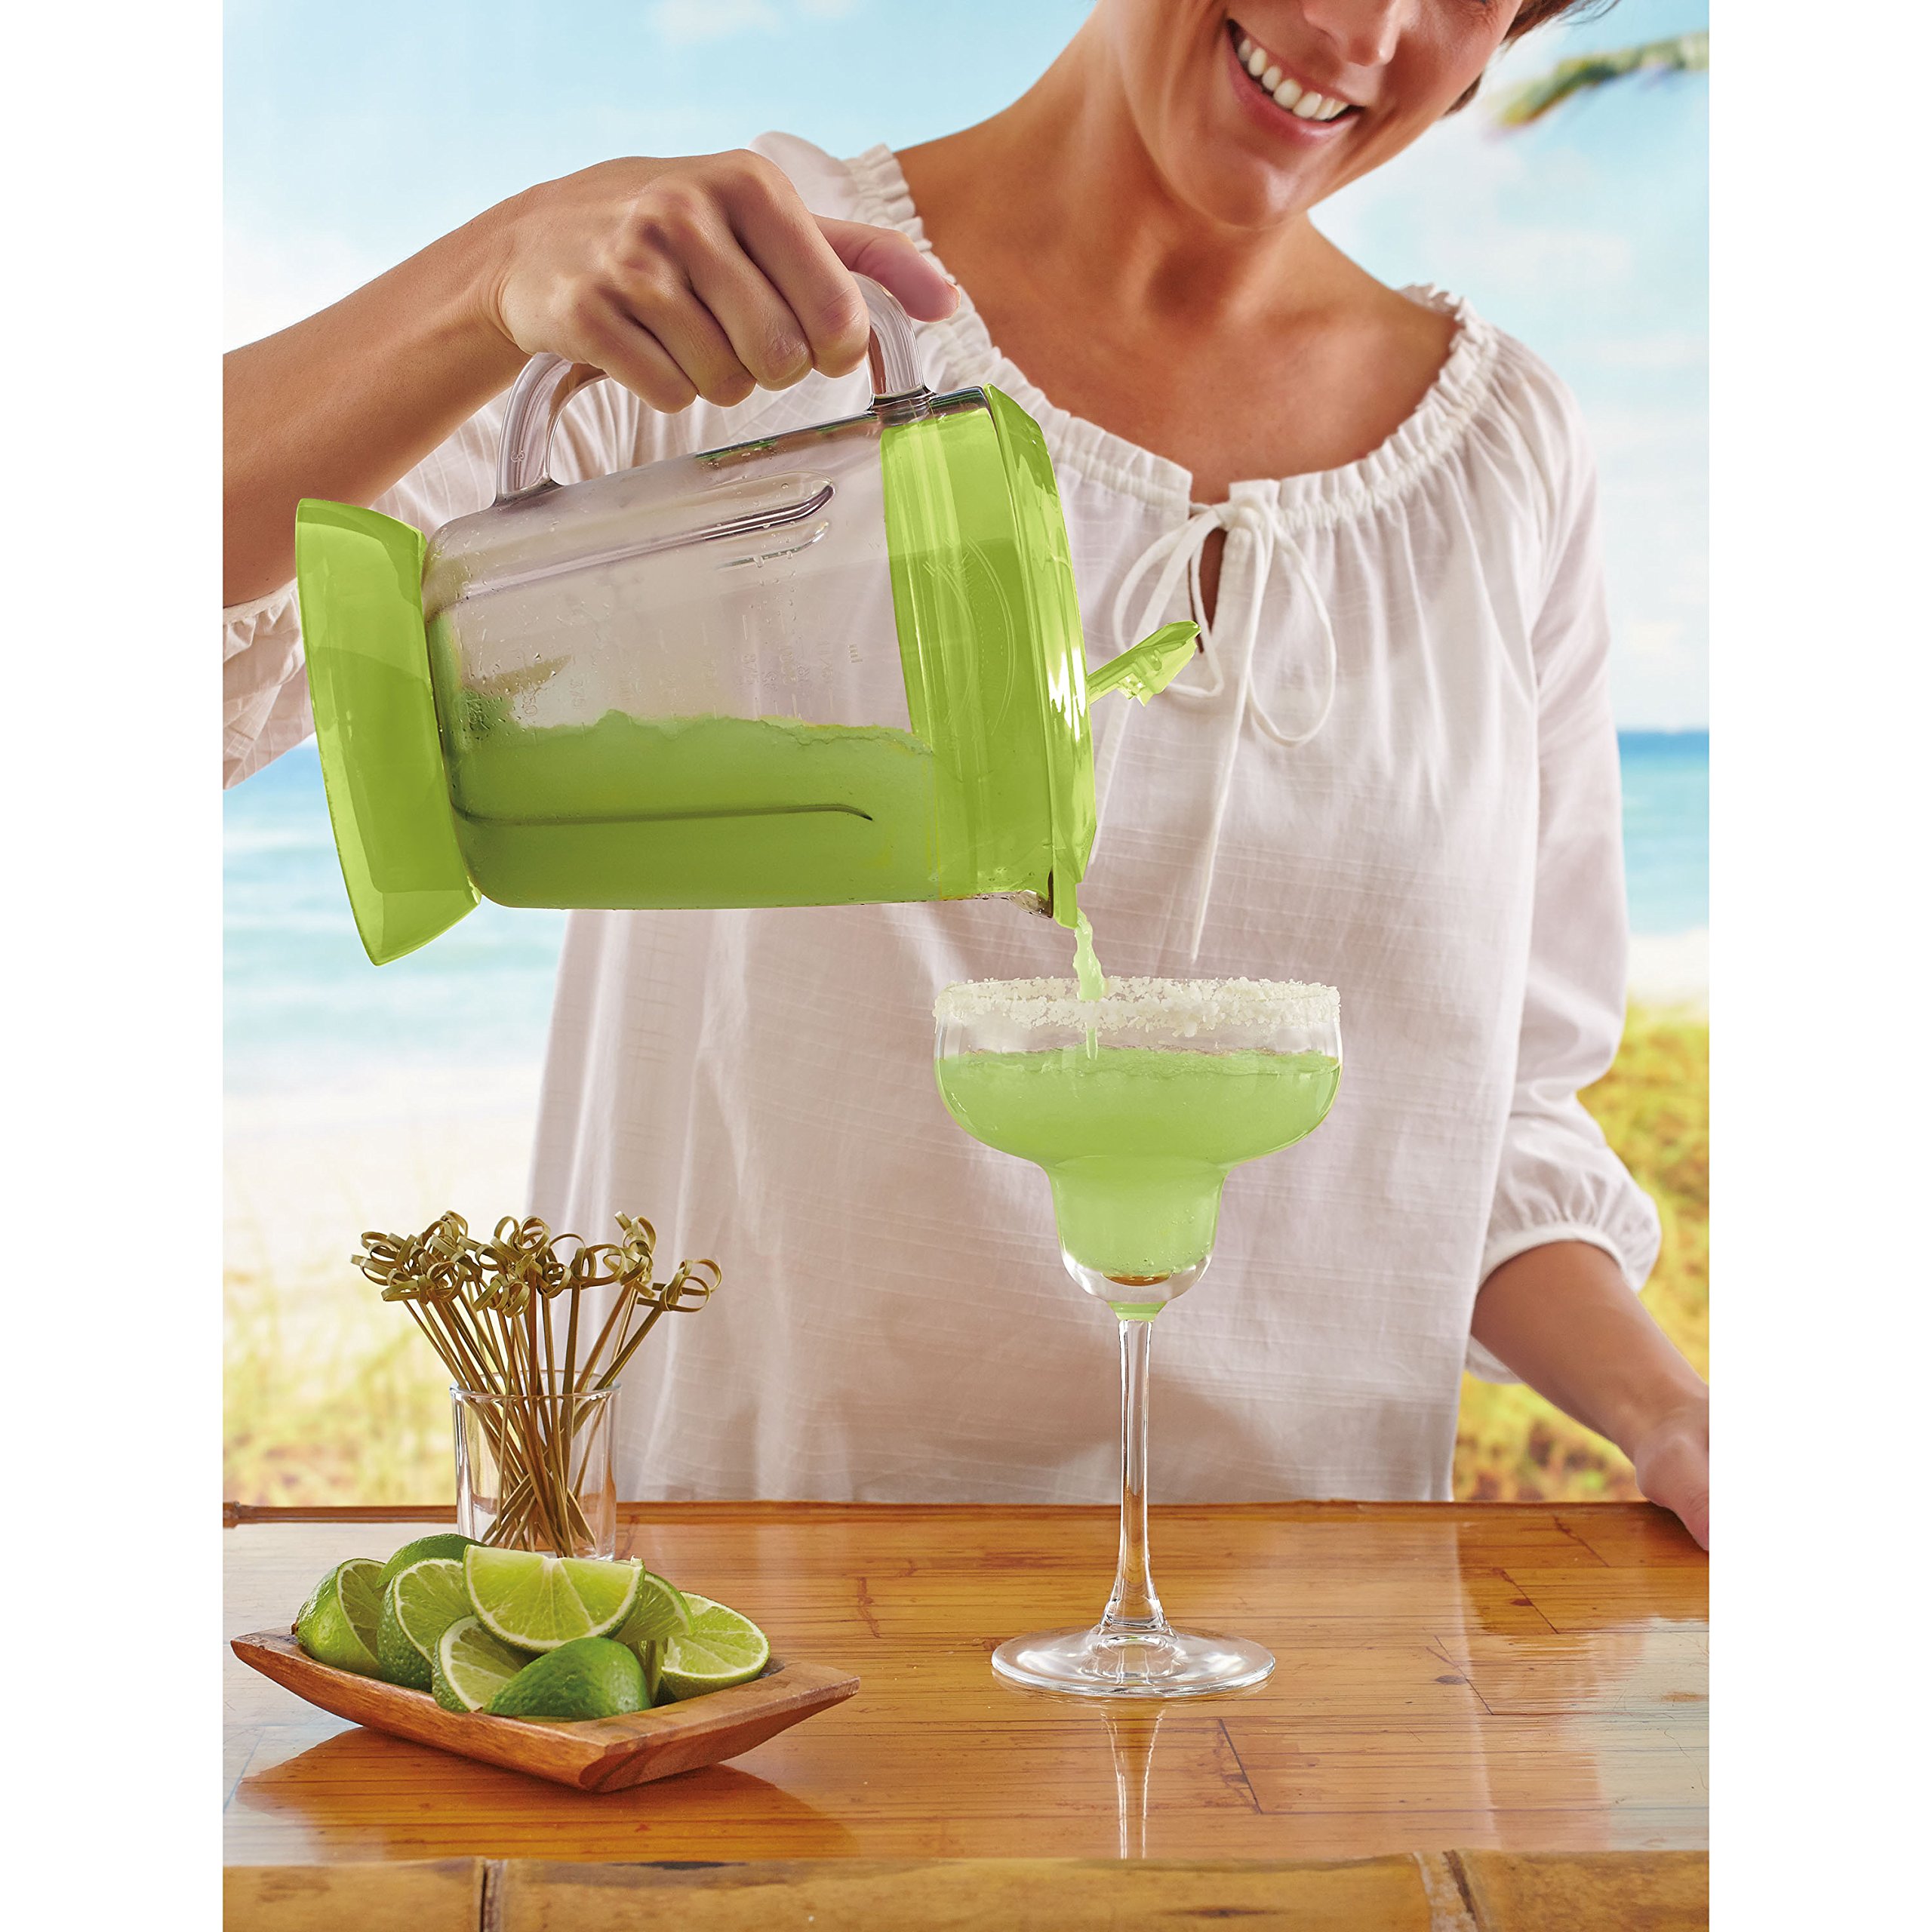 Margaritaville Bahamas Frozen Concoction Dual Mode Beverage Maker Home Margarita Machine with No-Brainer Mixer and, 36 Ounce Pitcher